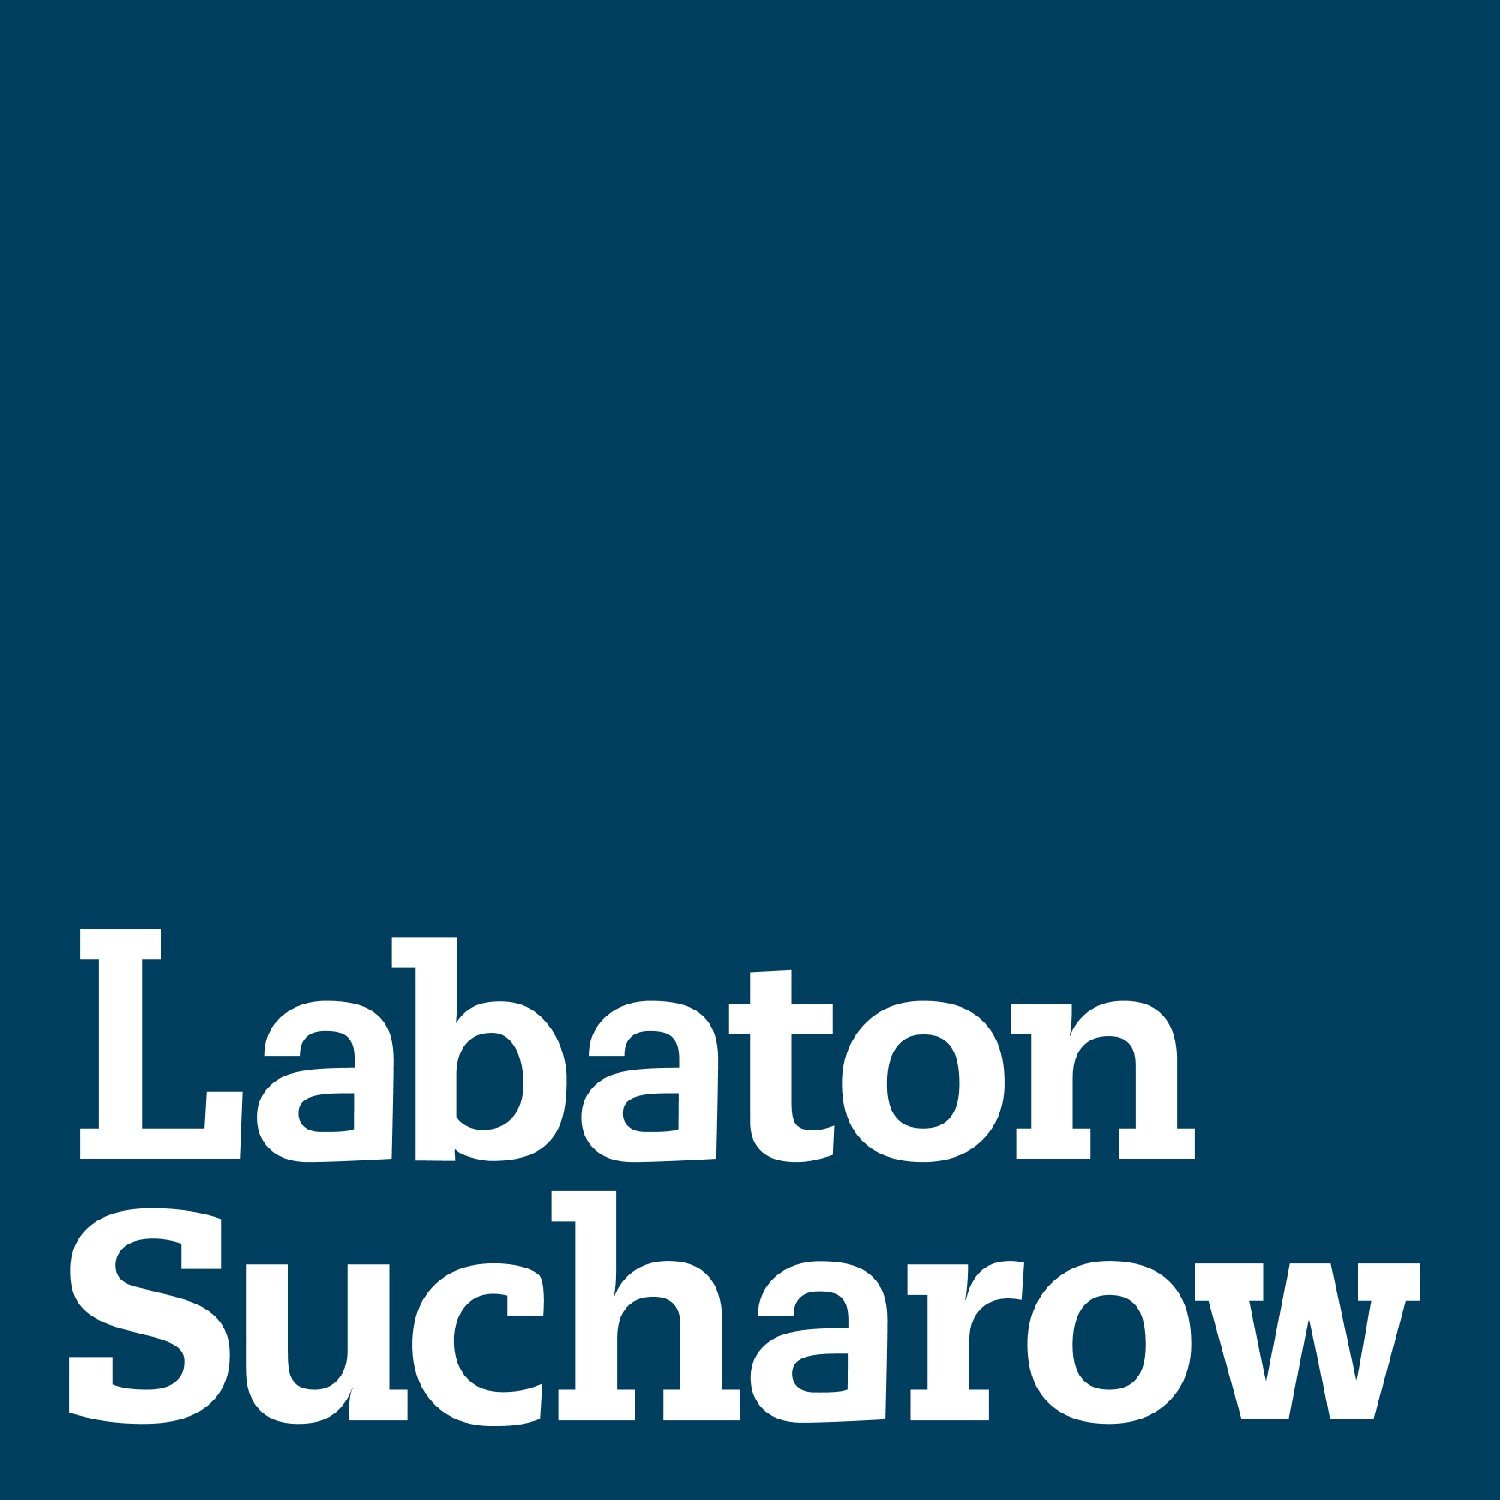 Labaton Sucharow LLP, Tuesday, January 18, 2022, Press release picture